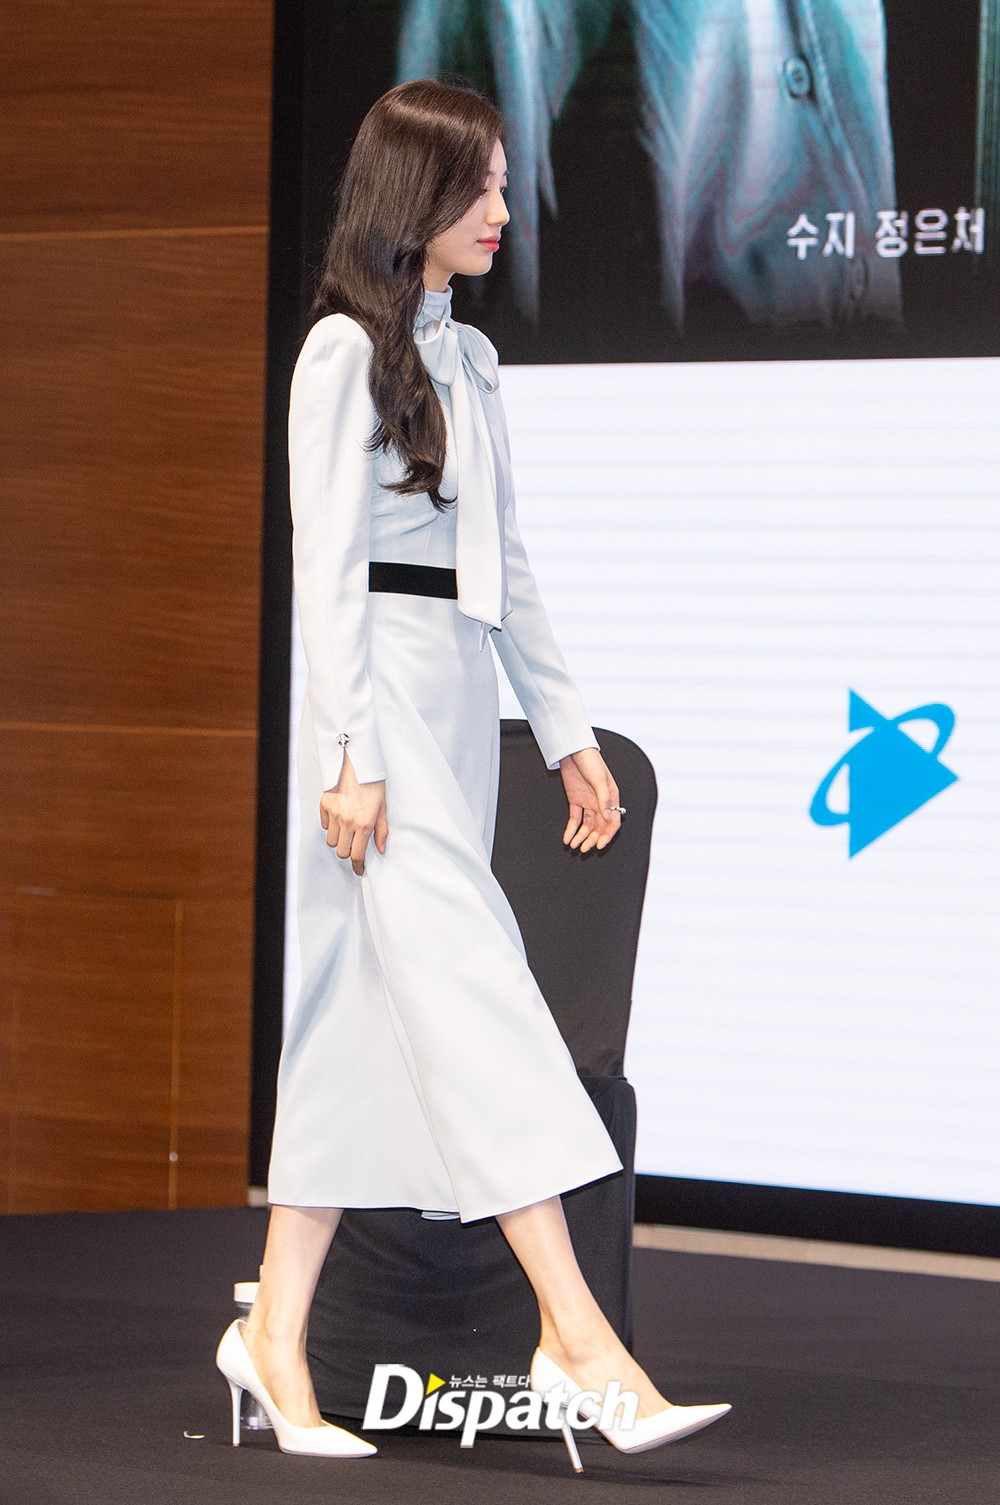 The nation's first love Suzy was stunned with the skin in the super close-up corner, the beauty of the Eternal King was completely inferior at the Anna movie press conference - Photo 2.